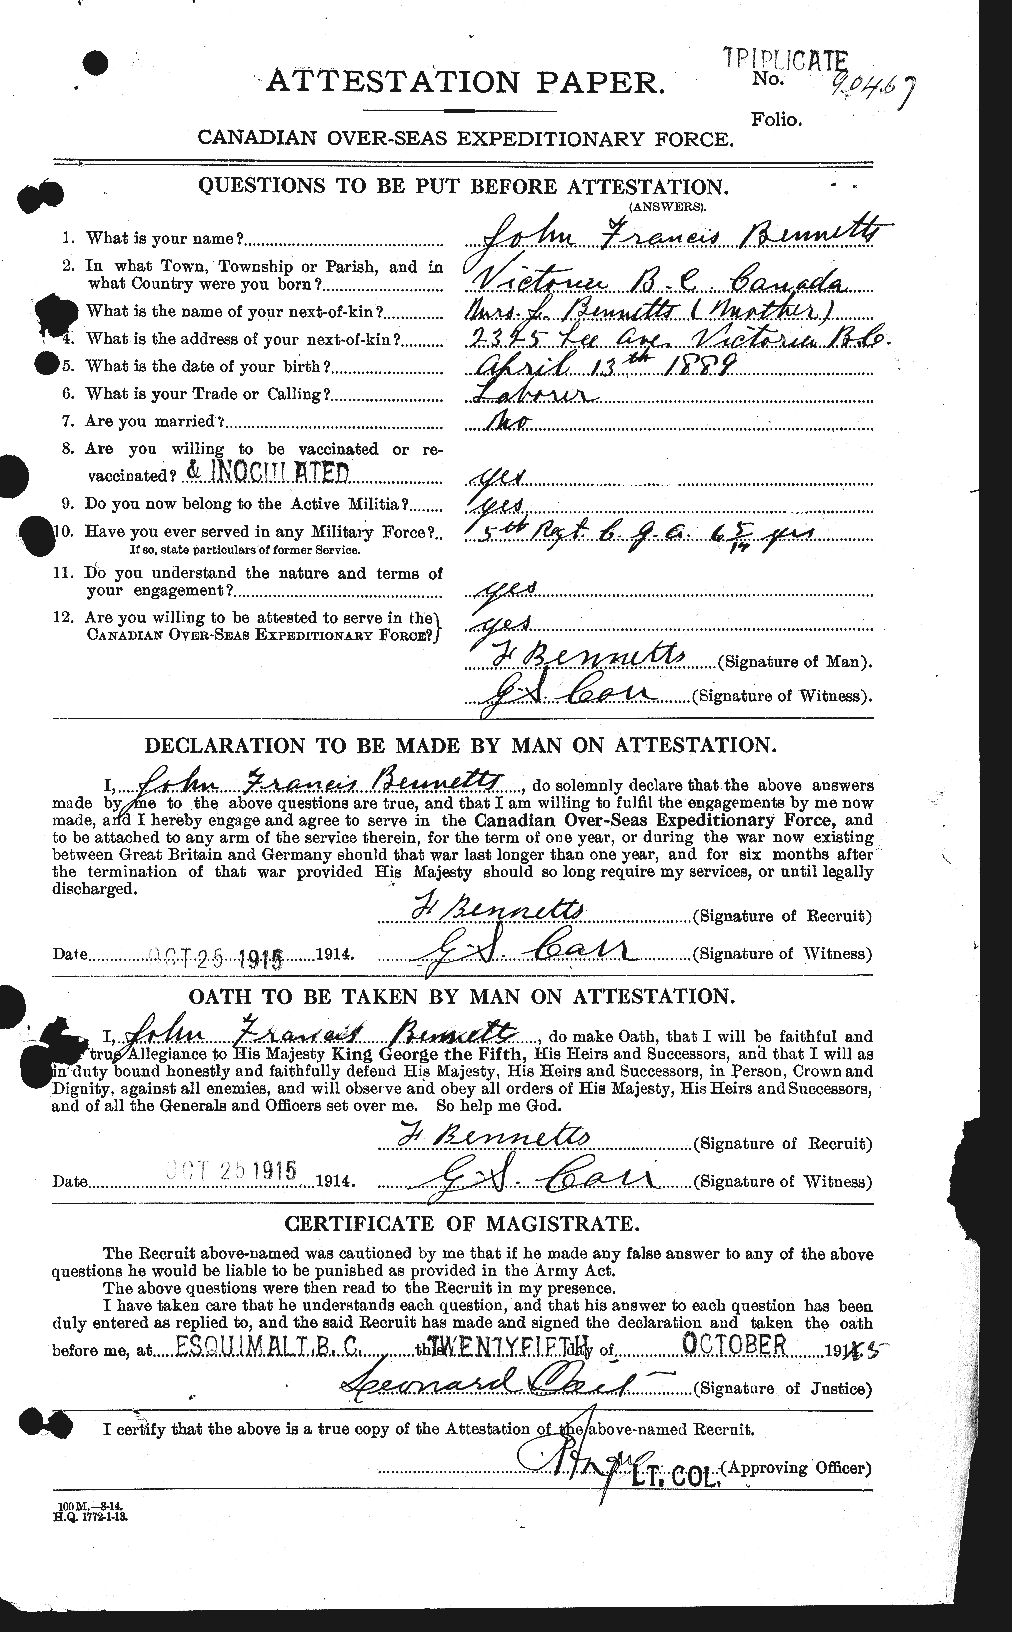 Personnel Records of the First World War - CEF 238596a